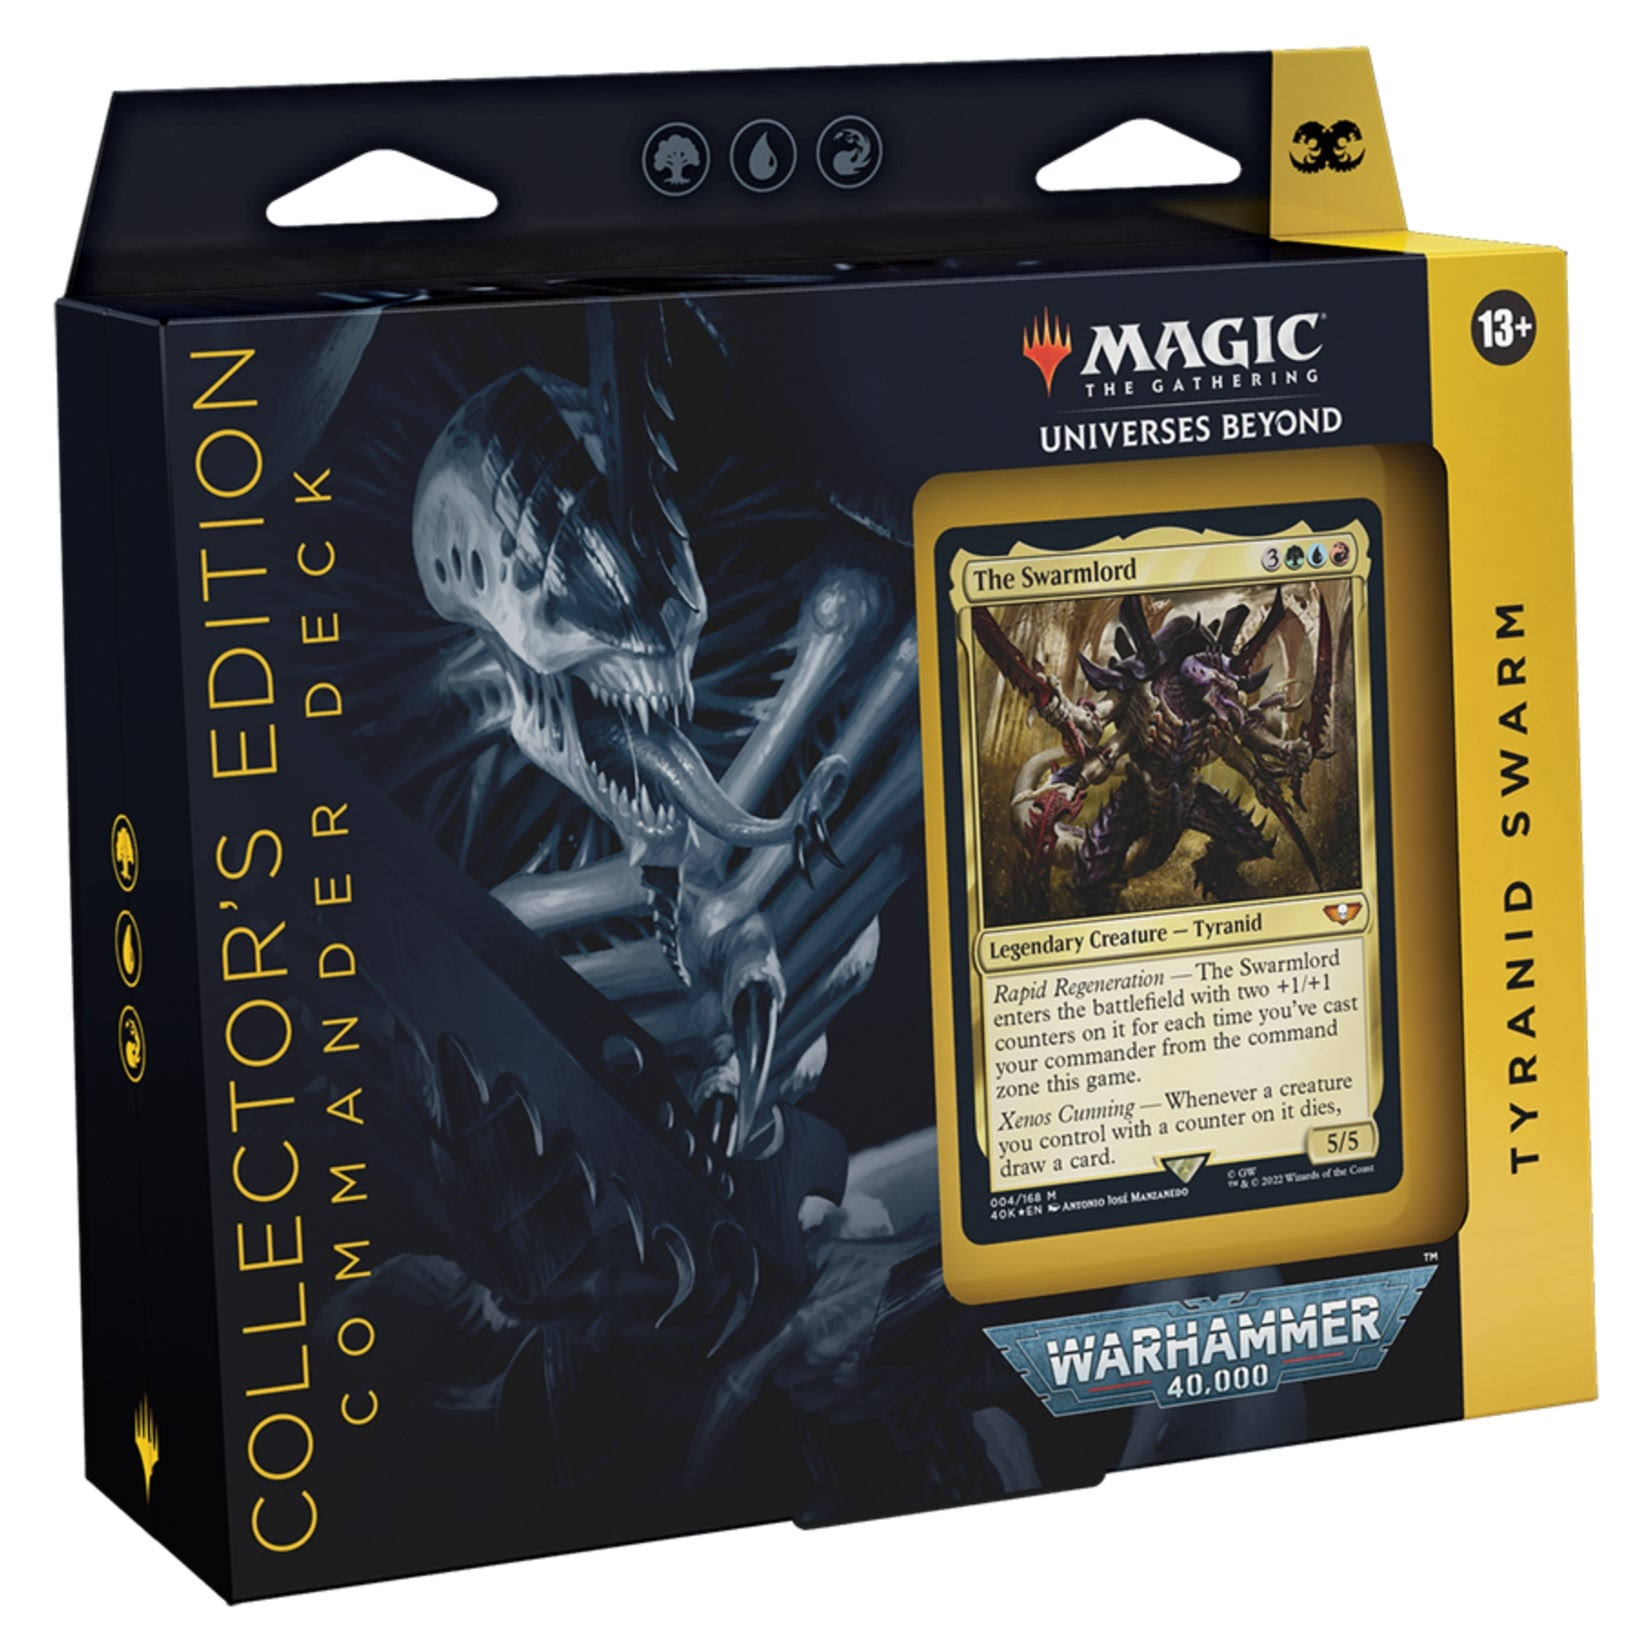 Magic The Gathering: Universes Beyond: Warhammer 40,000 - Tyranid Swarm Commander Deck (Collector's Edition)